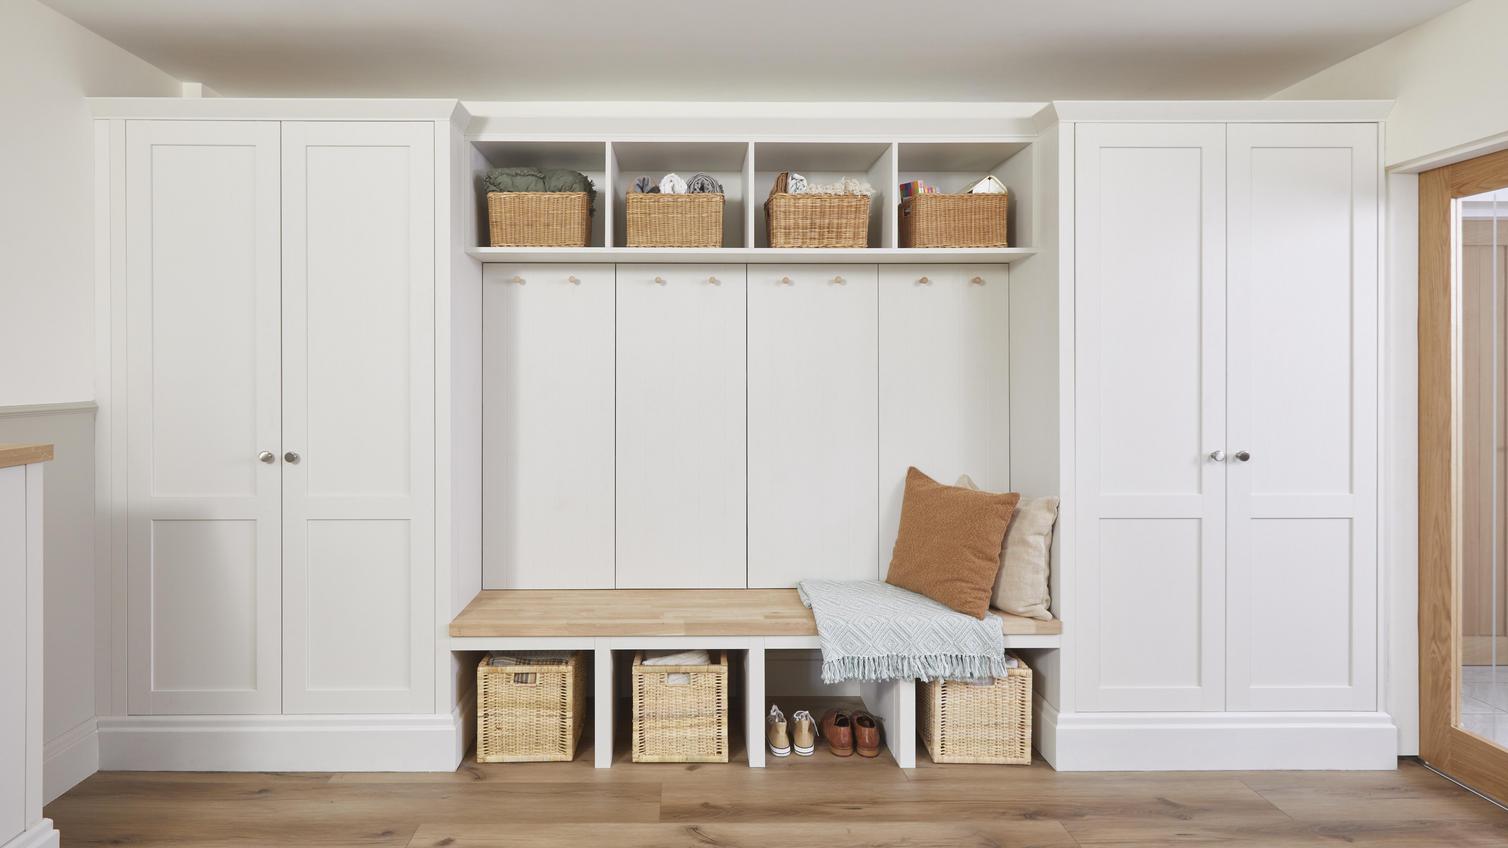 Halesworth built in cabinetry, in a bright white tone